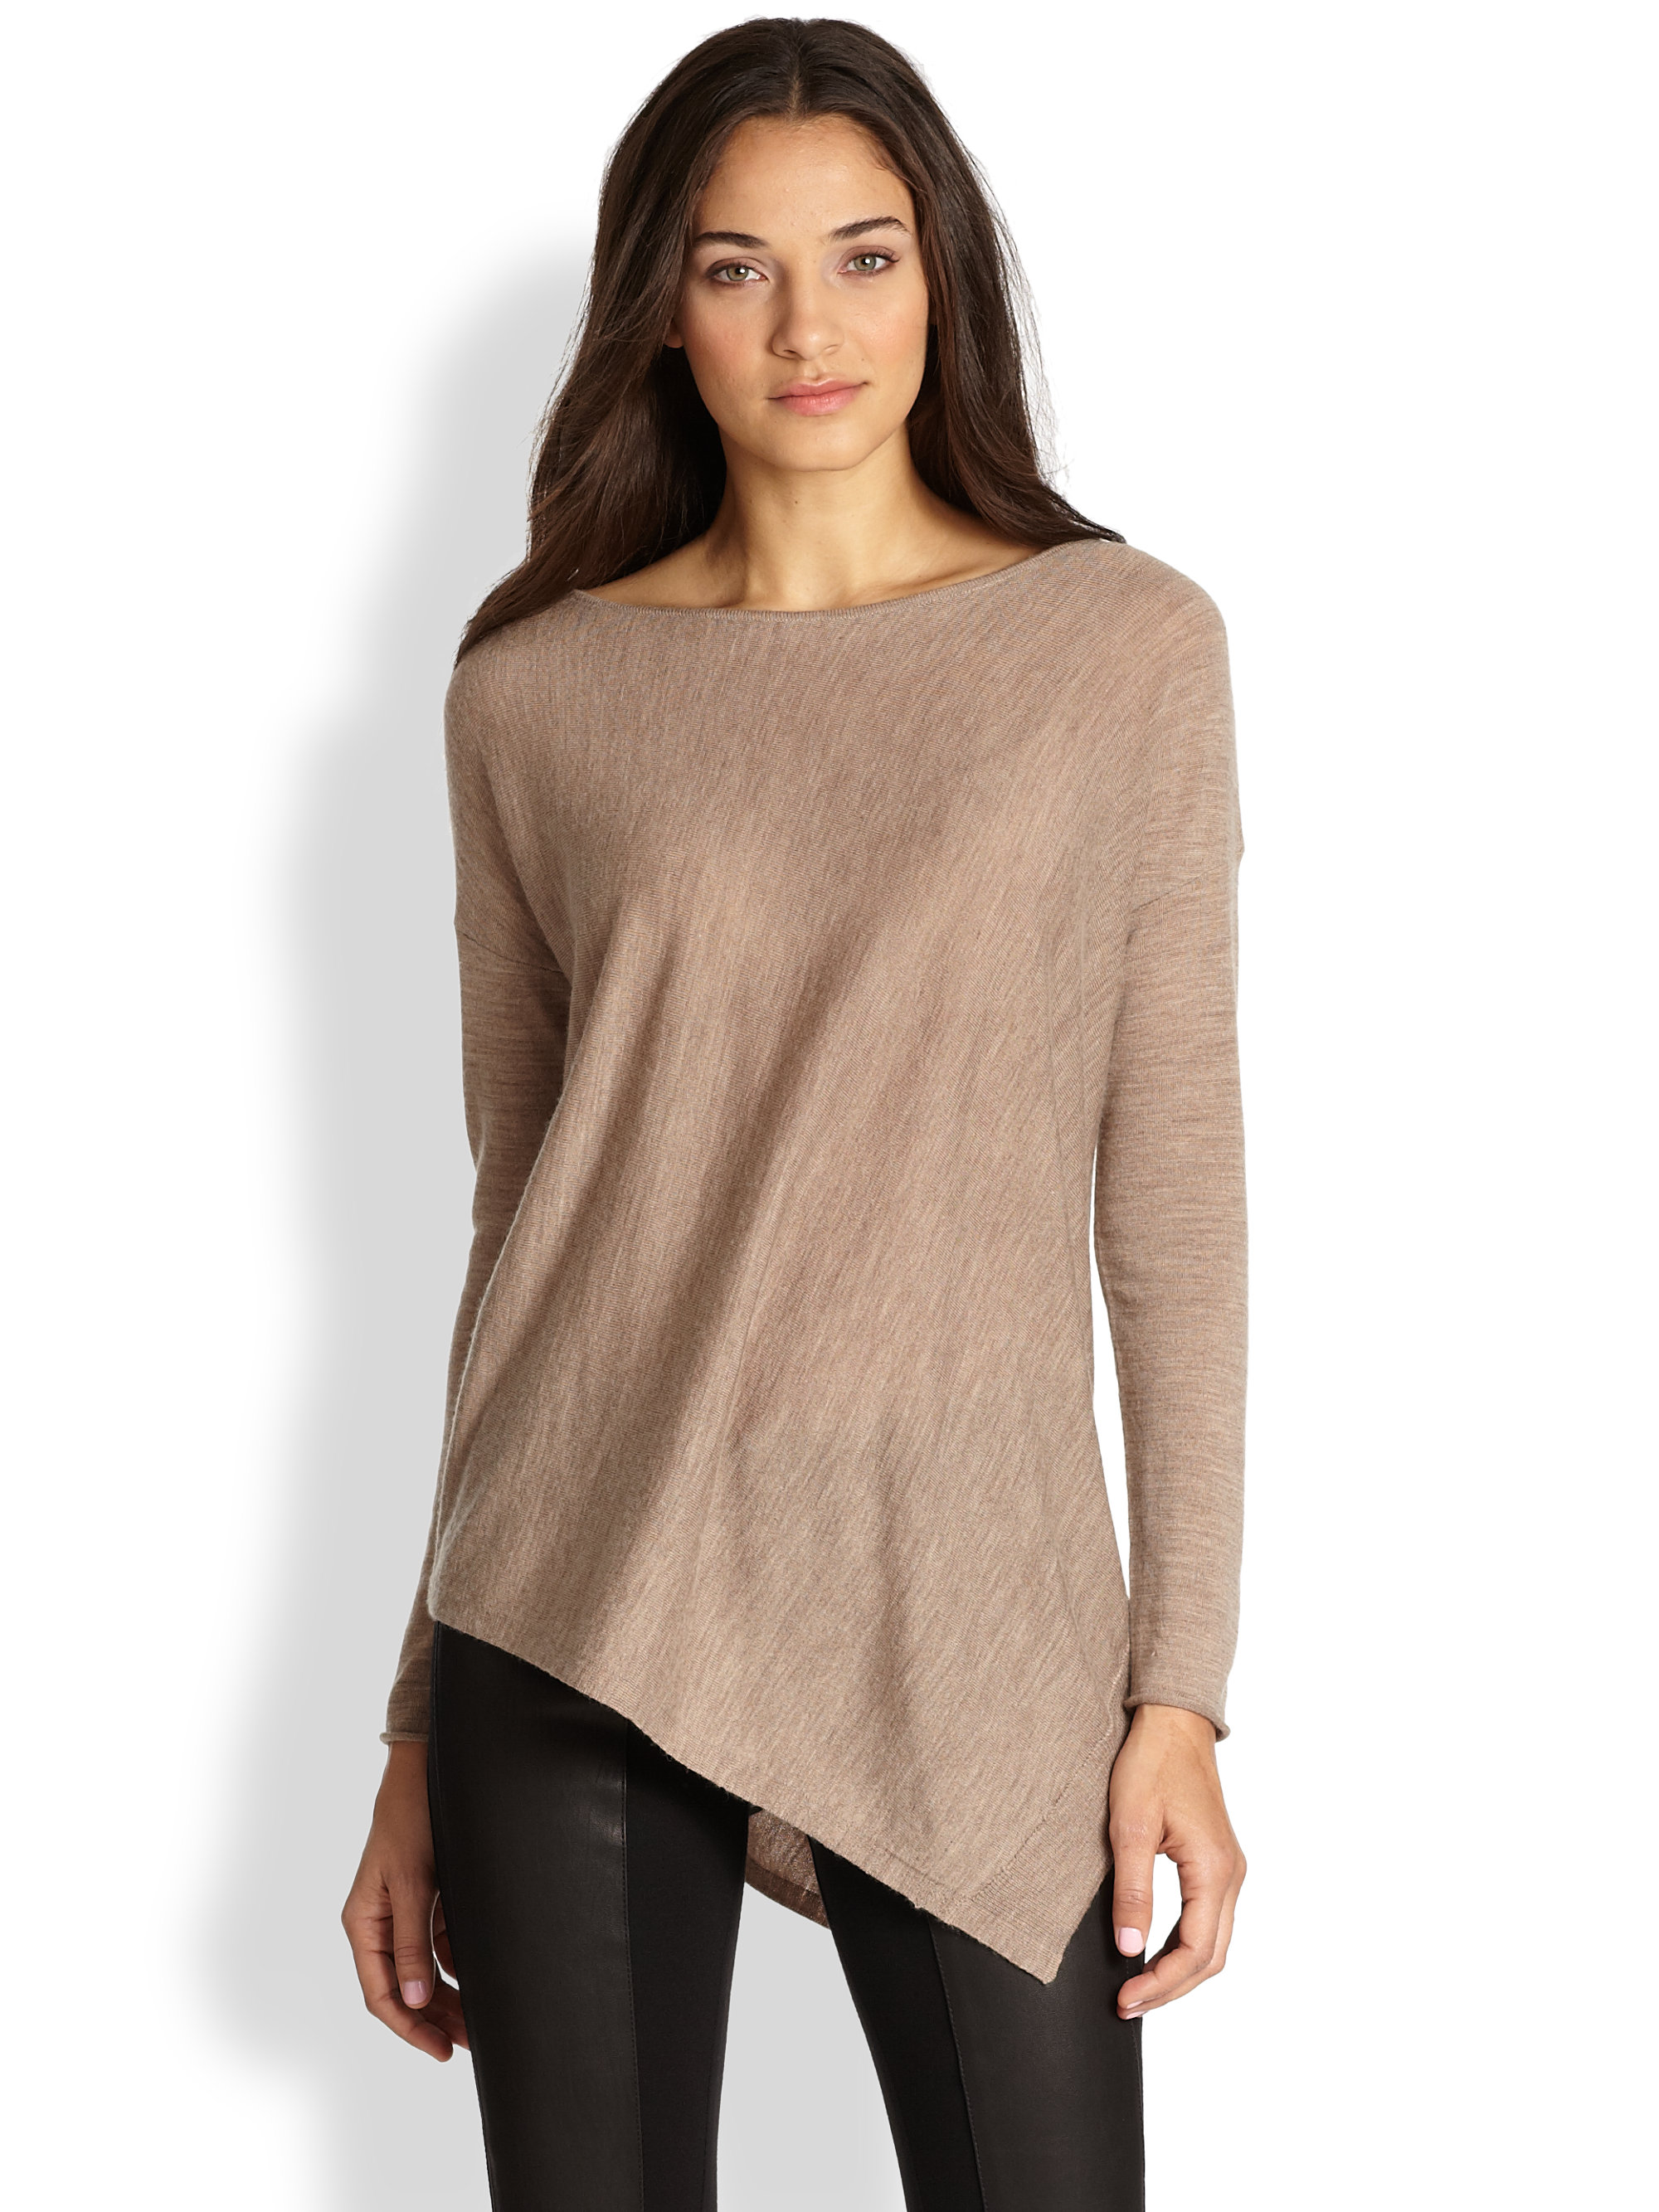 cashmere pullover gallery LARMVZF